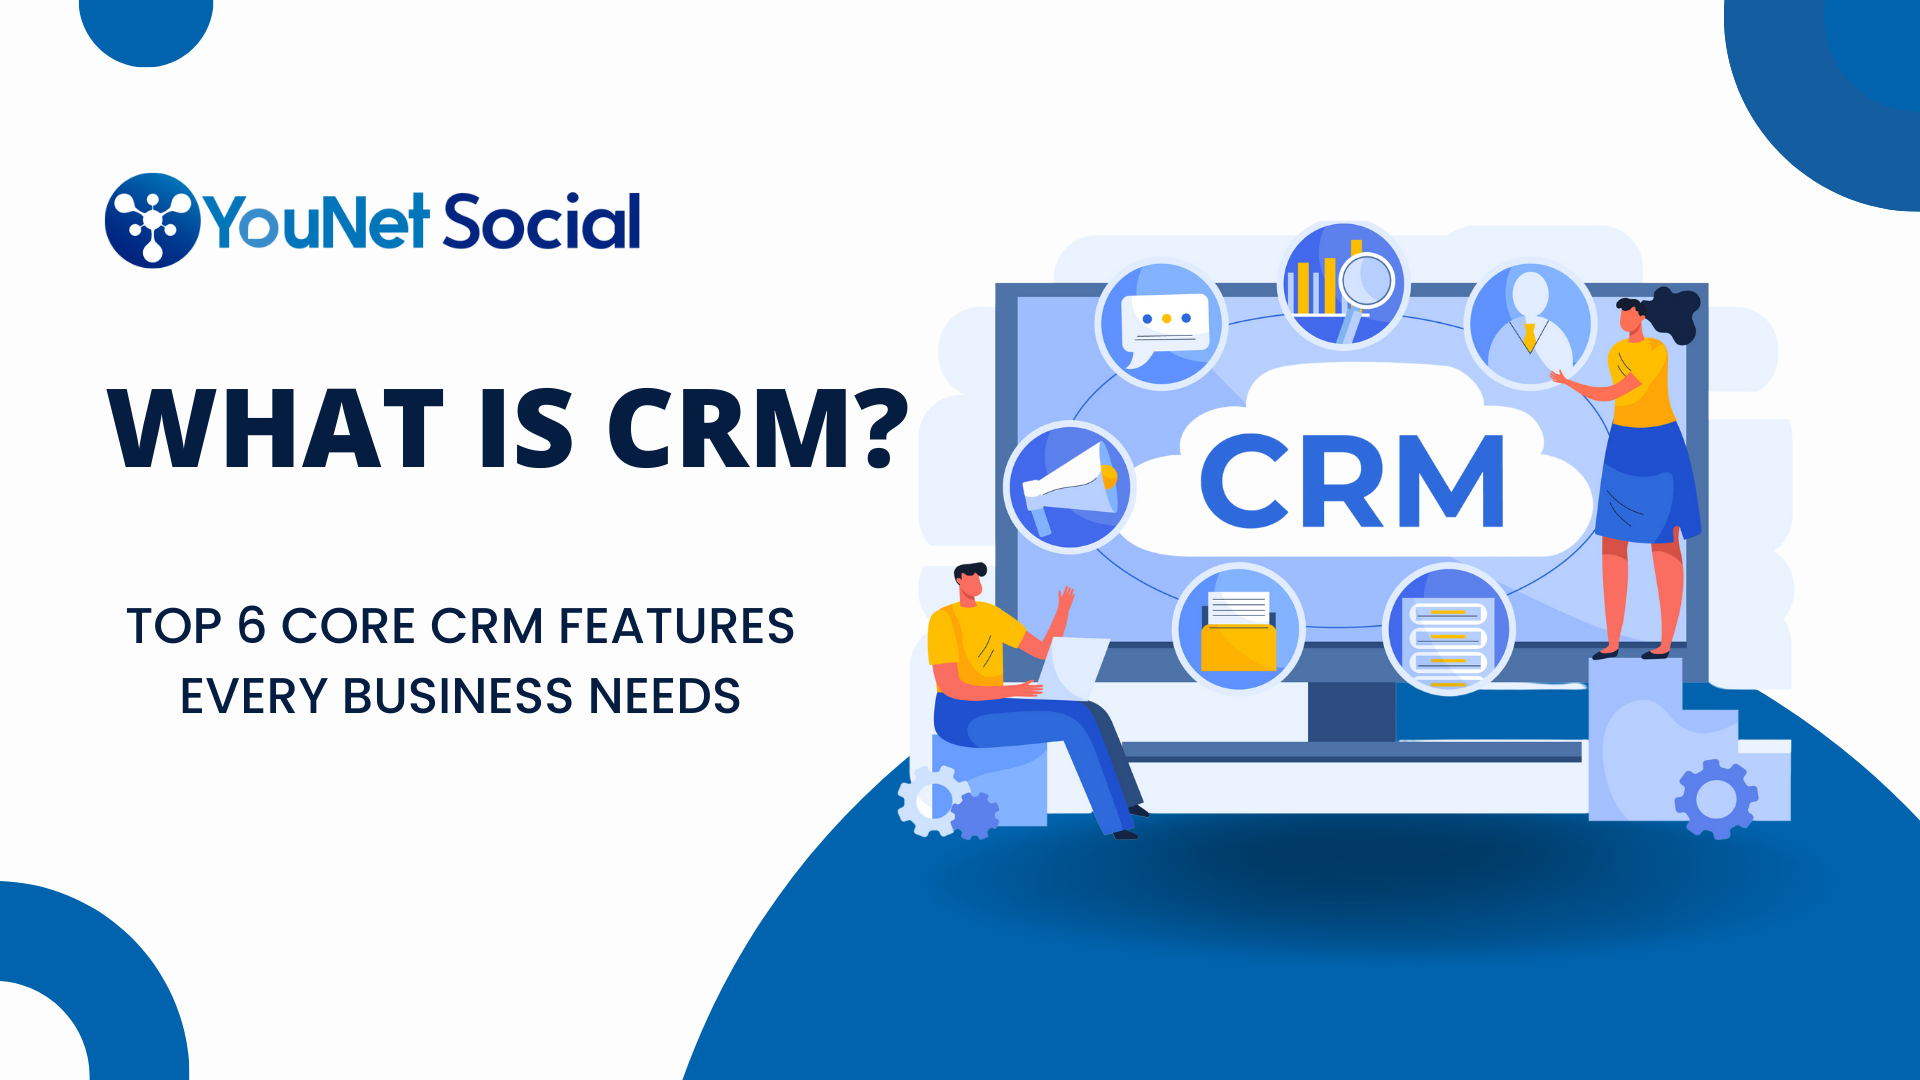 Top 6 Core CRM Features Every Business Needs